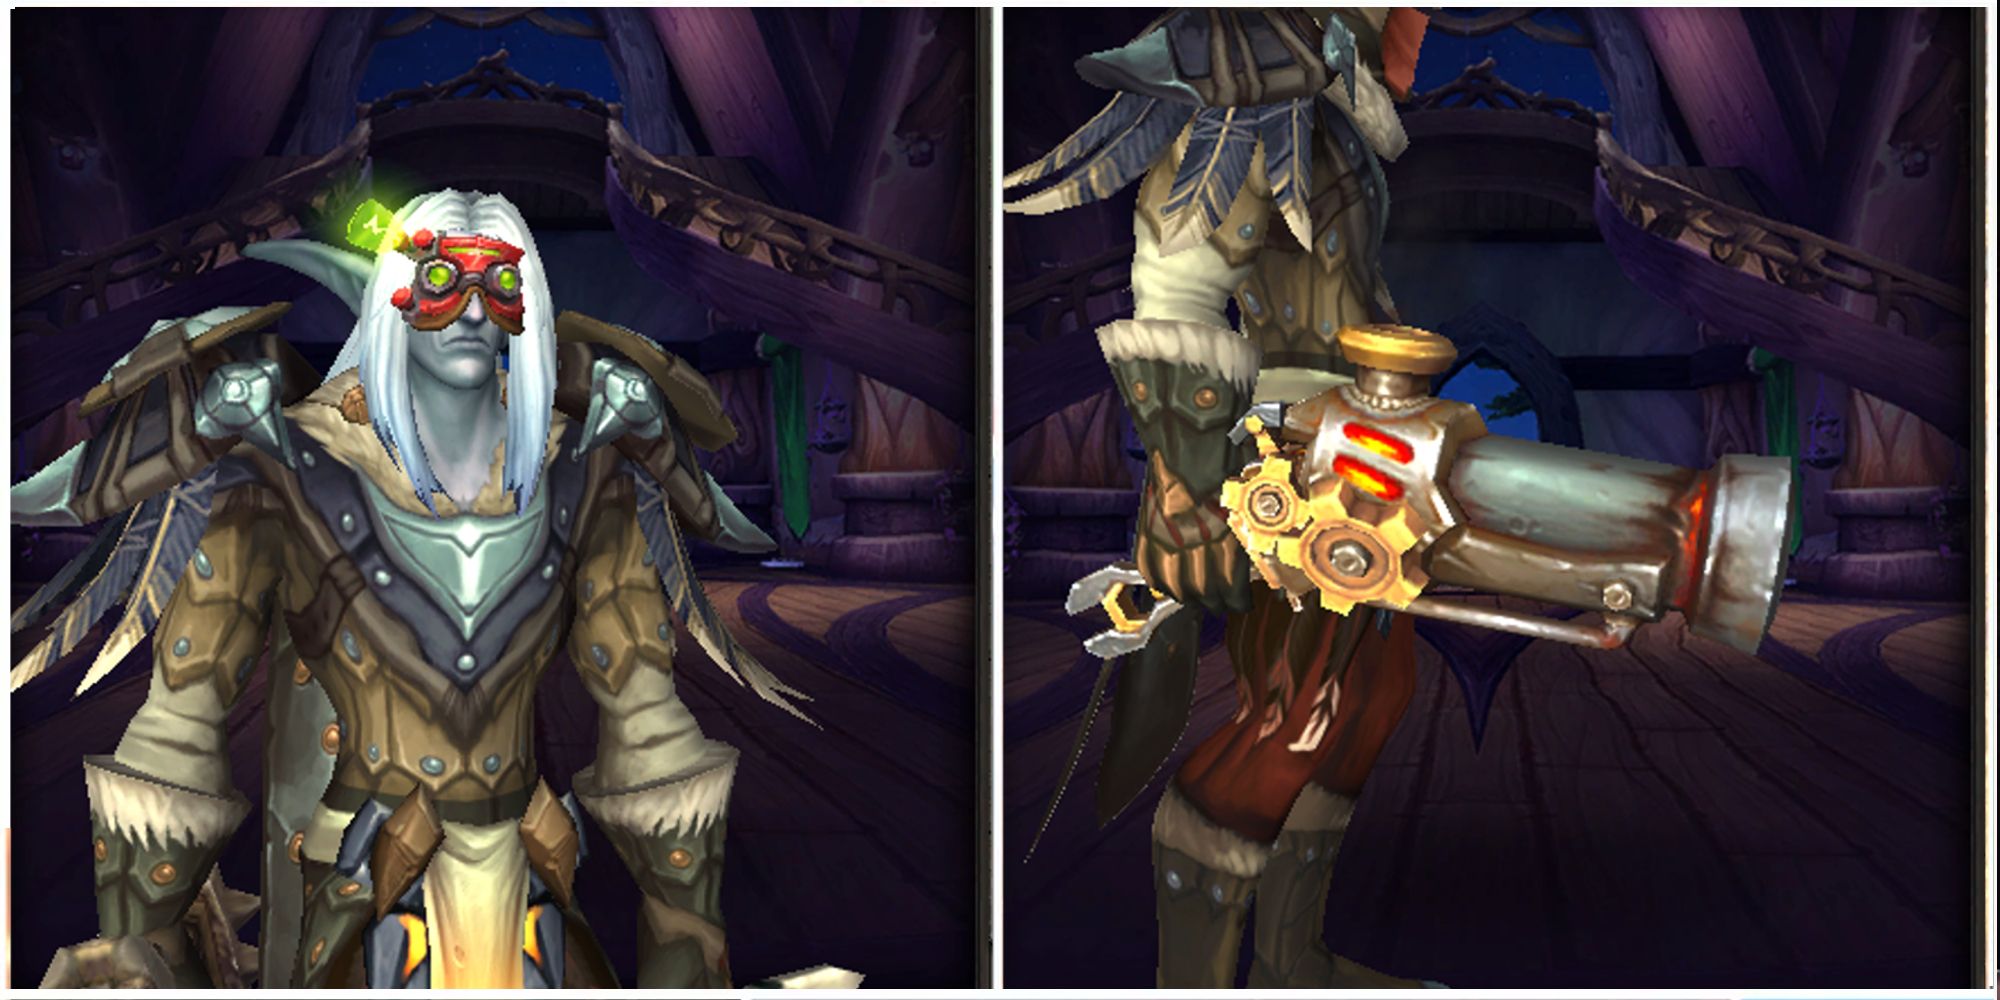 Night Elf Hunter wears engineering goggles and holds gun in World of Warcraft Dragonflight